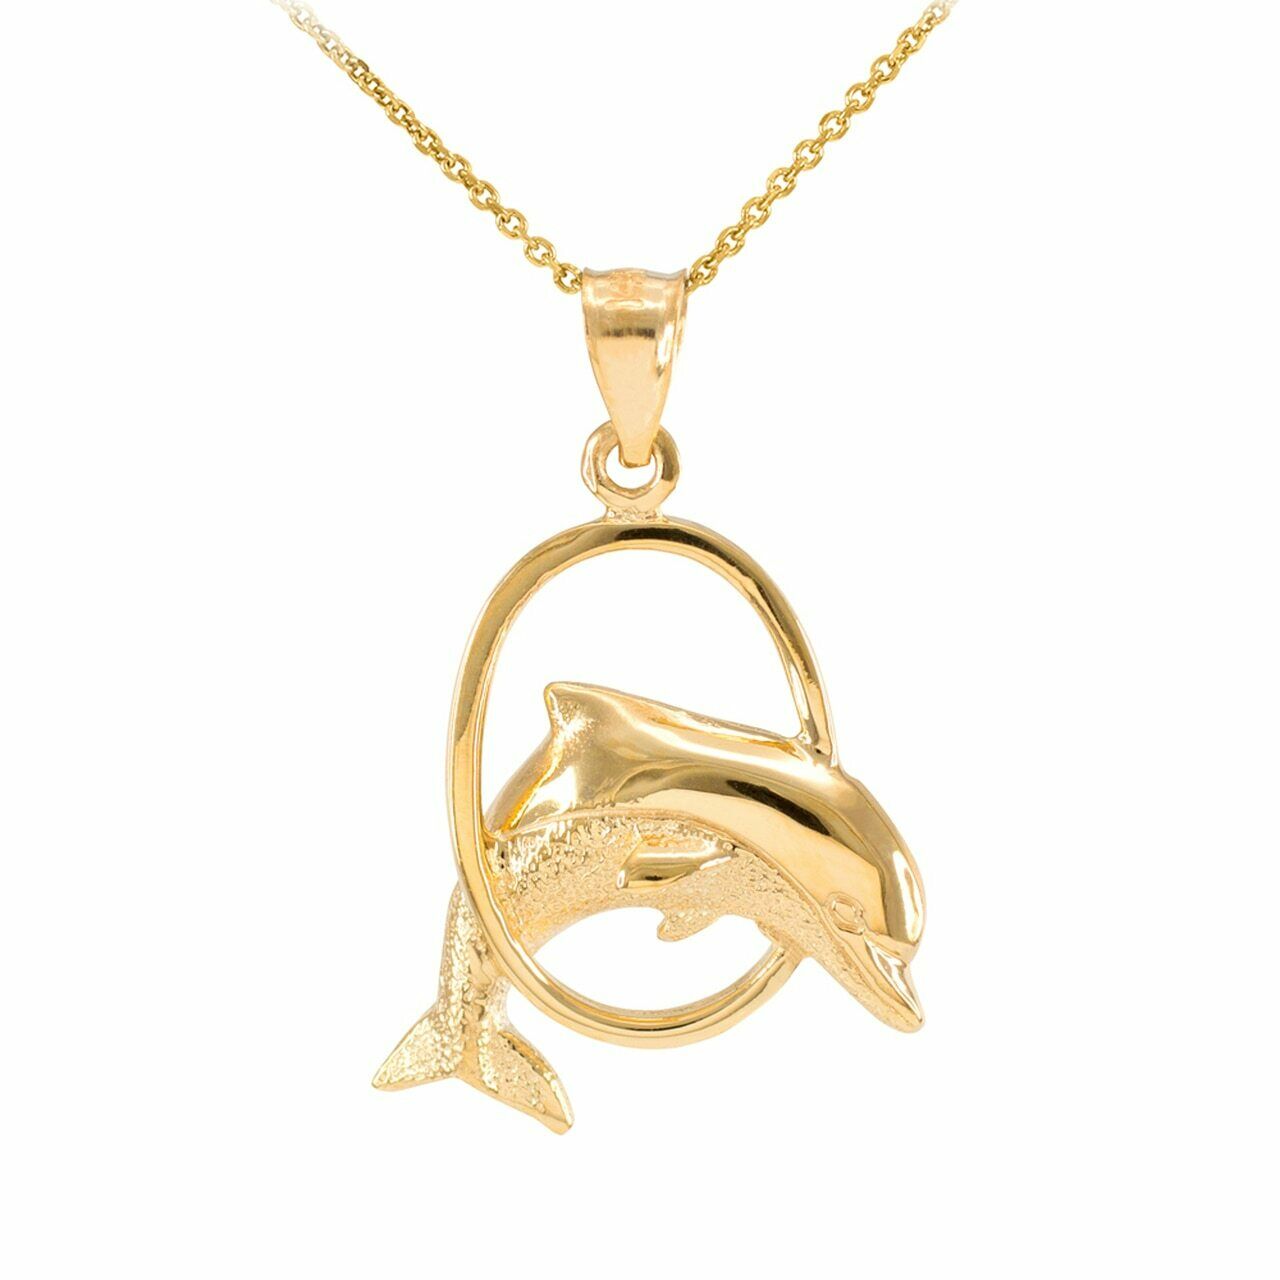 10k Real Solid Yellow Gold Hoop Jumping Dolphin Pendant Necklace